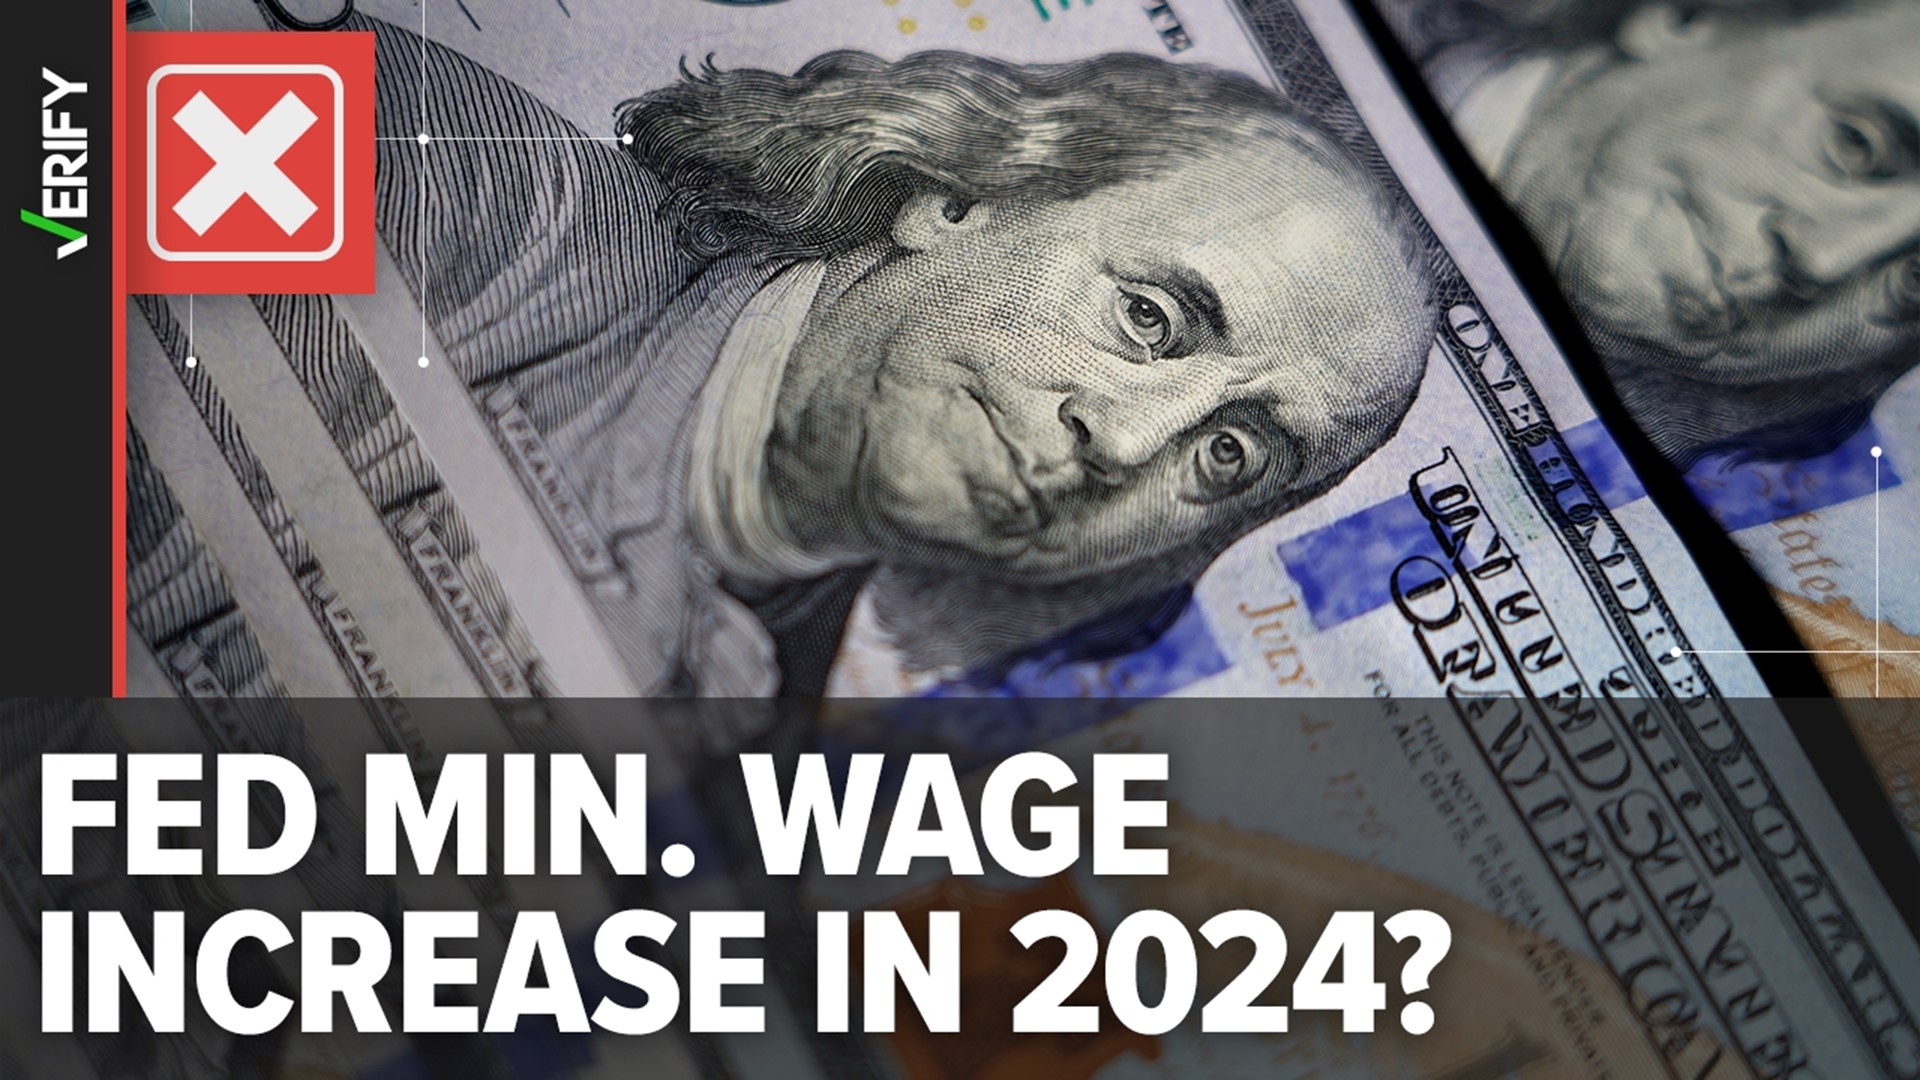 WA, Seattle have some of the highest minimum wages in 2024